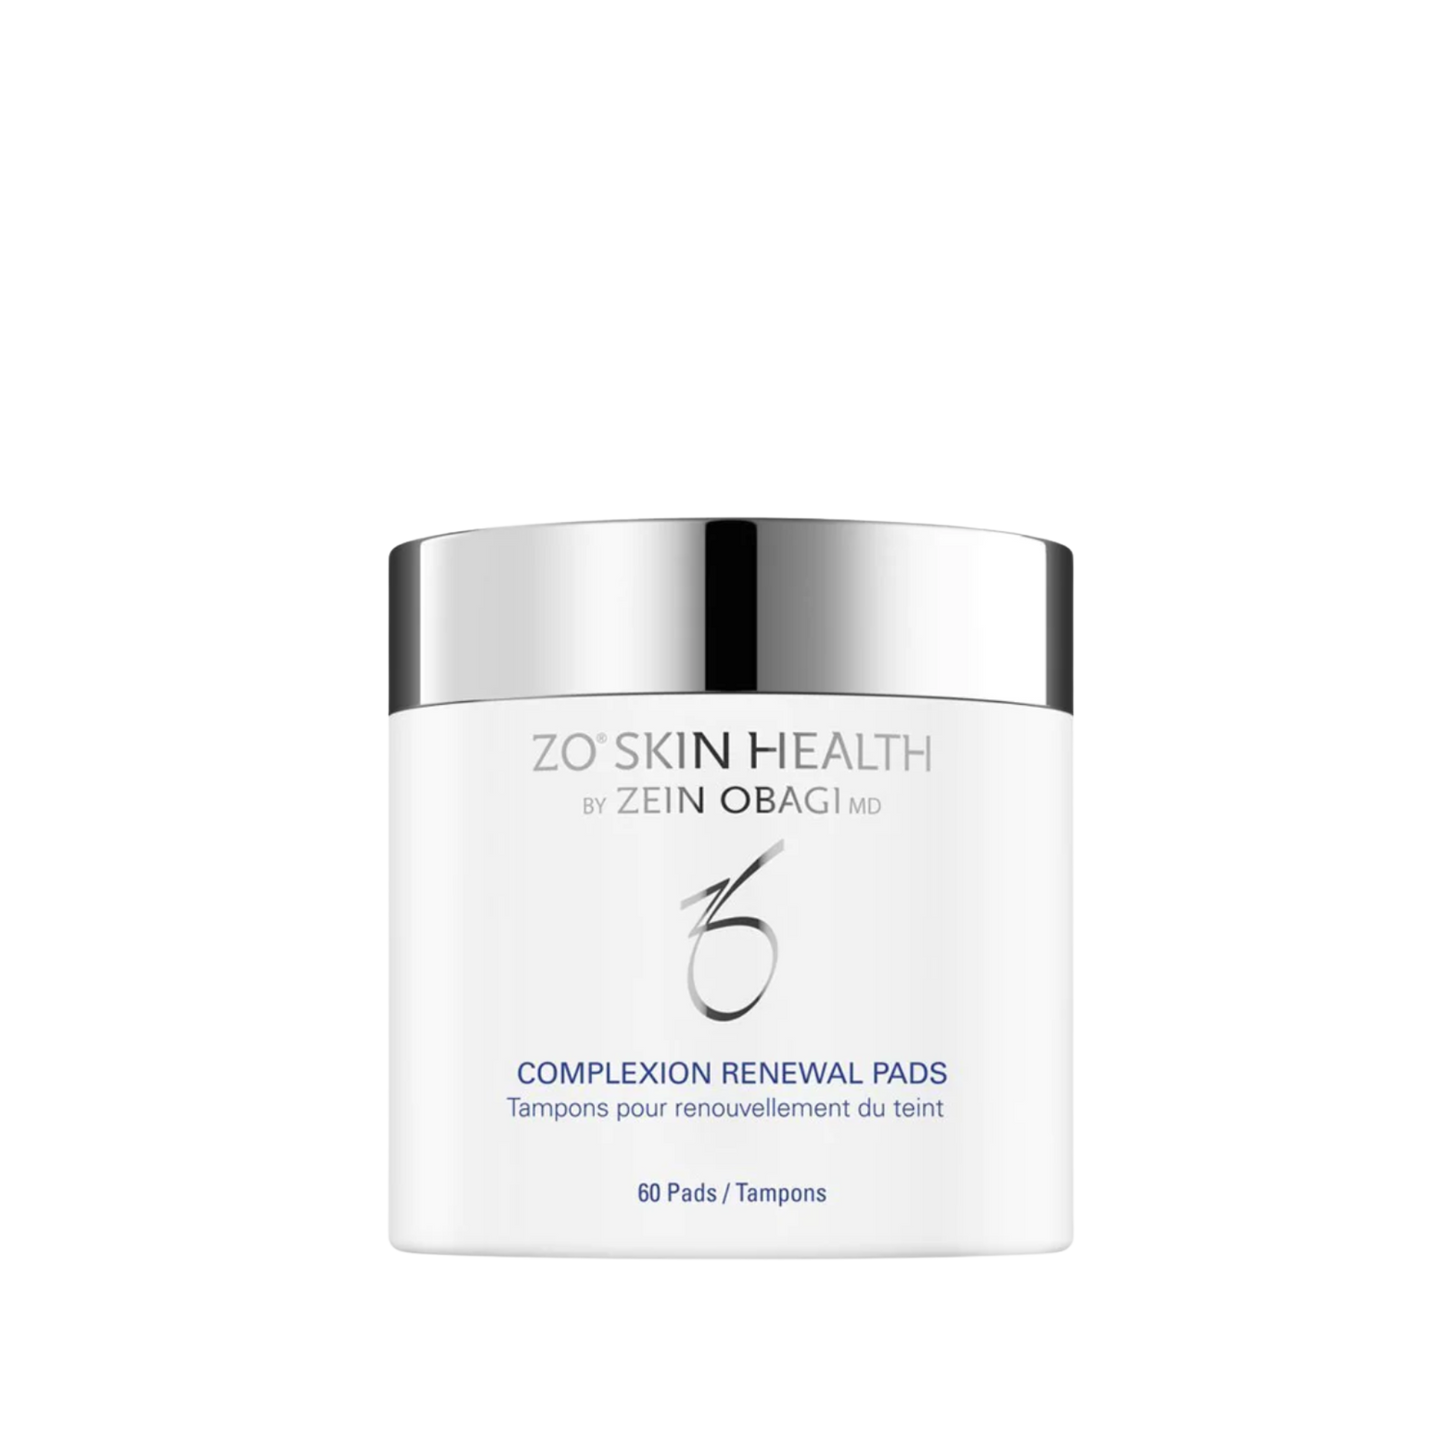 ZO® SKIN HEALTH COMPLEXION RENEWAL PADS